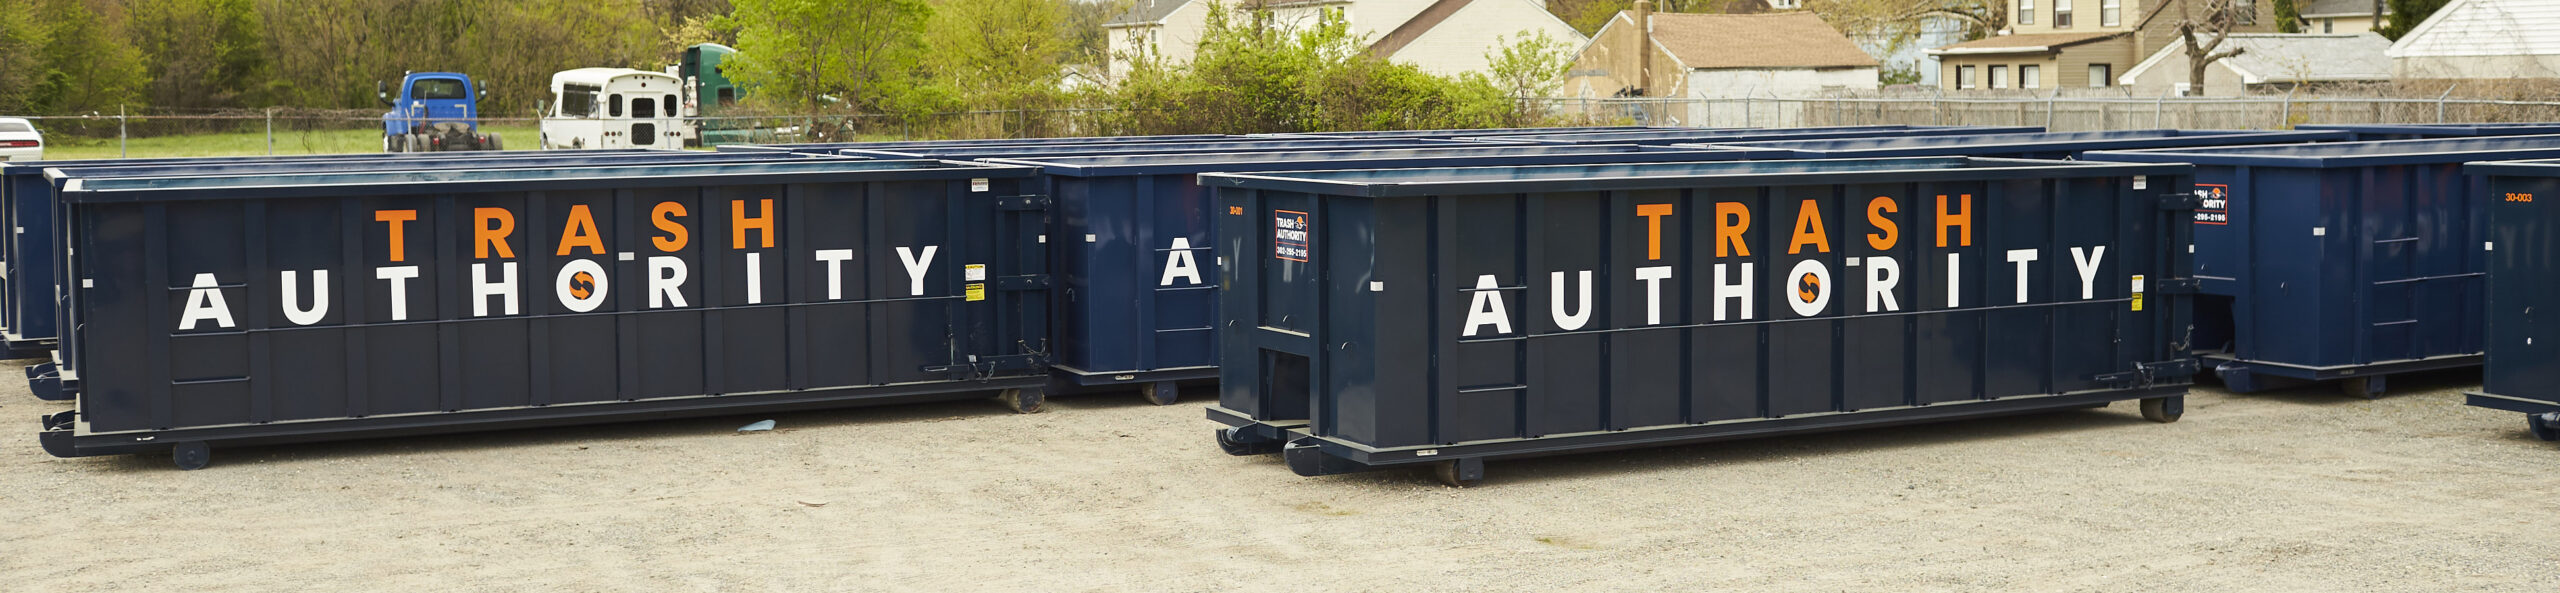 Trash Authority Dumpsters service areas